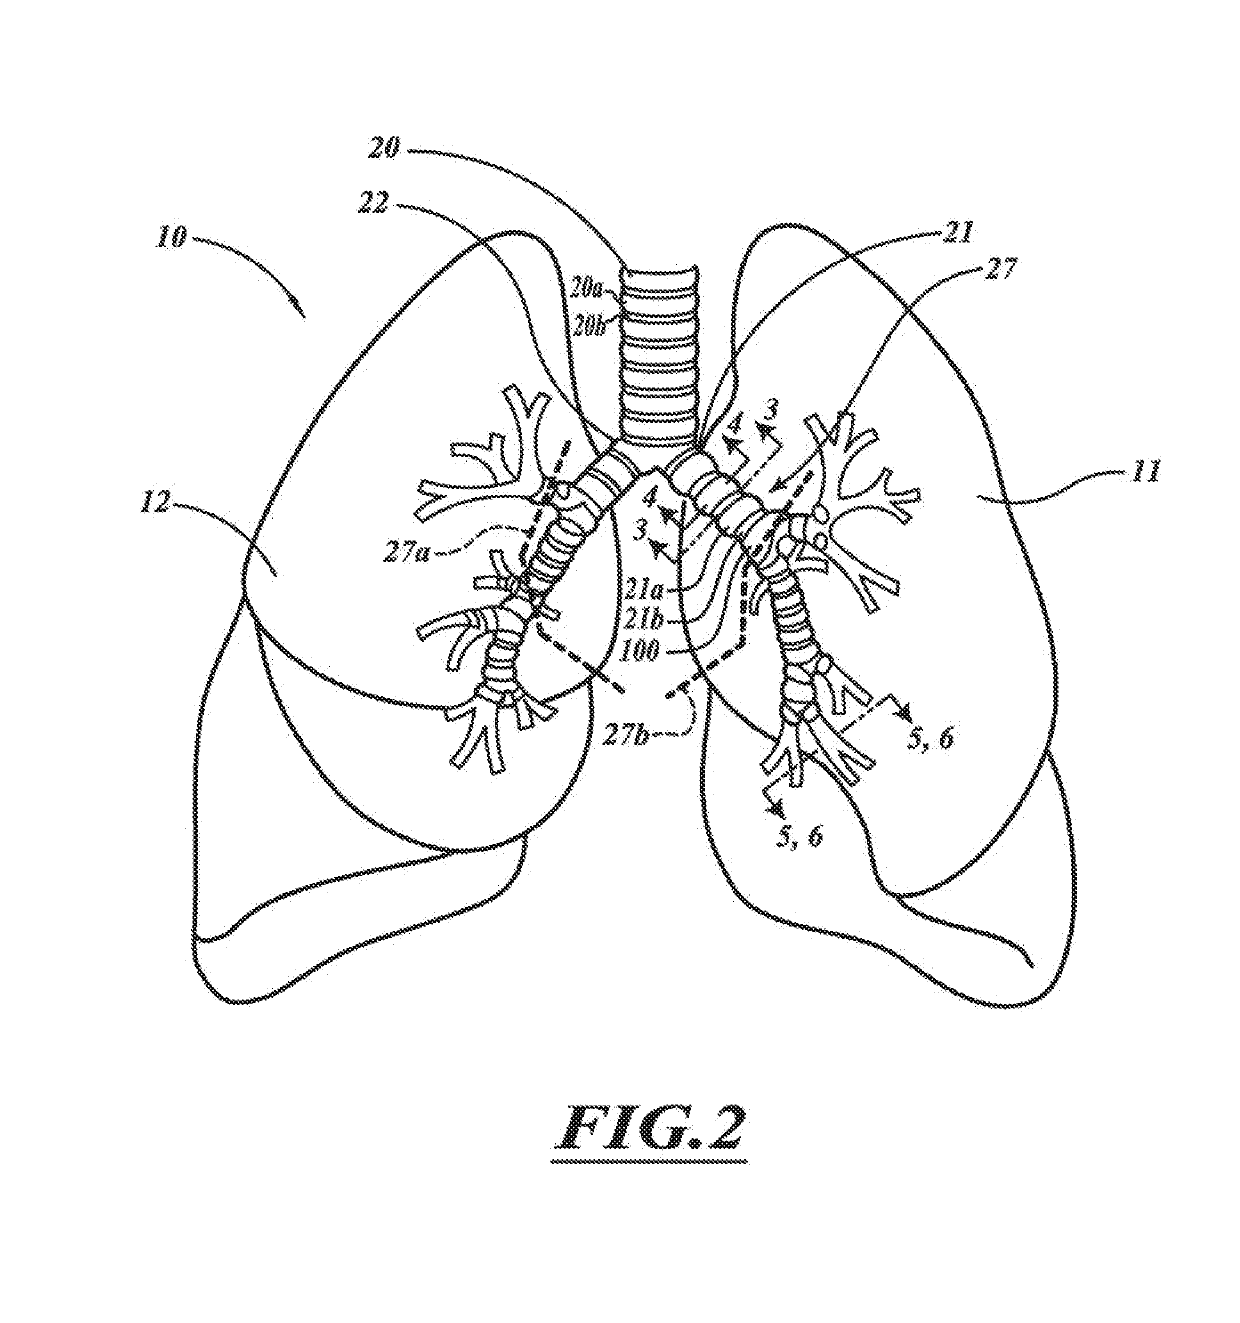 Compact delivery pulmonary treatment systems and methods for improving pulmonary function